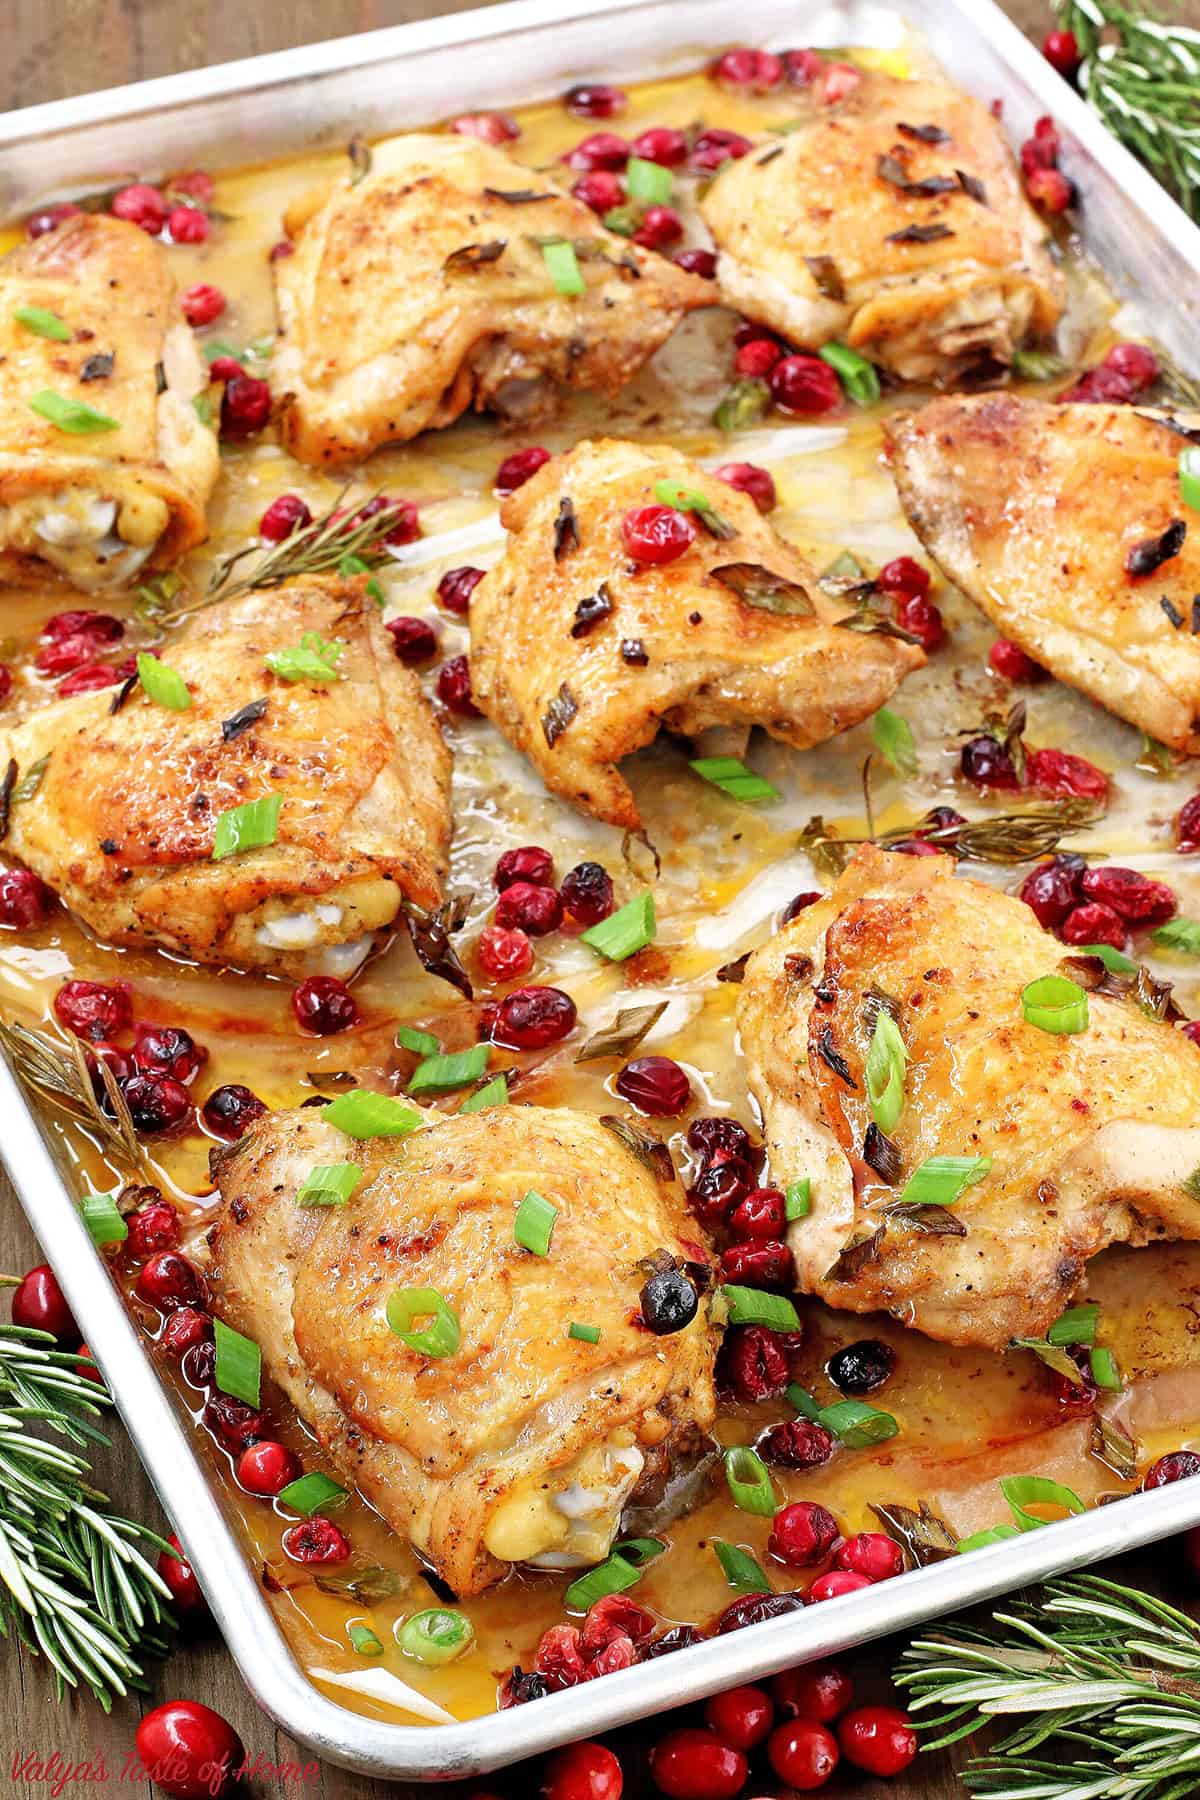 Christmas Chicken is the classic chicken main dish that is served during Christmas lunch or Christmas dinner.